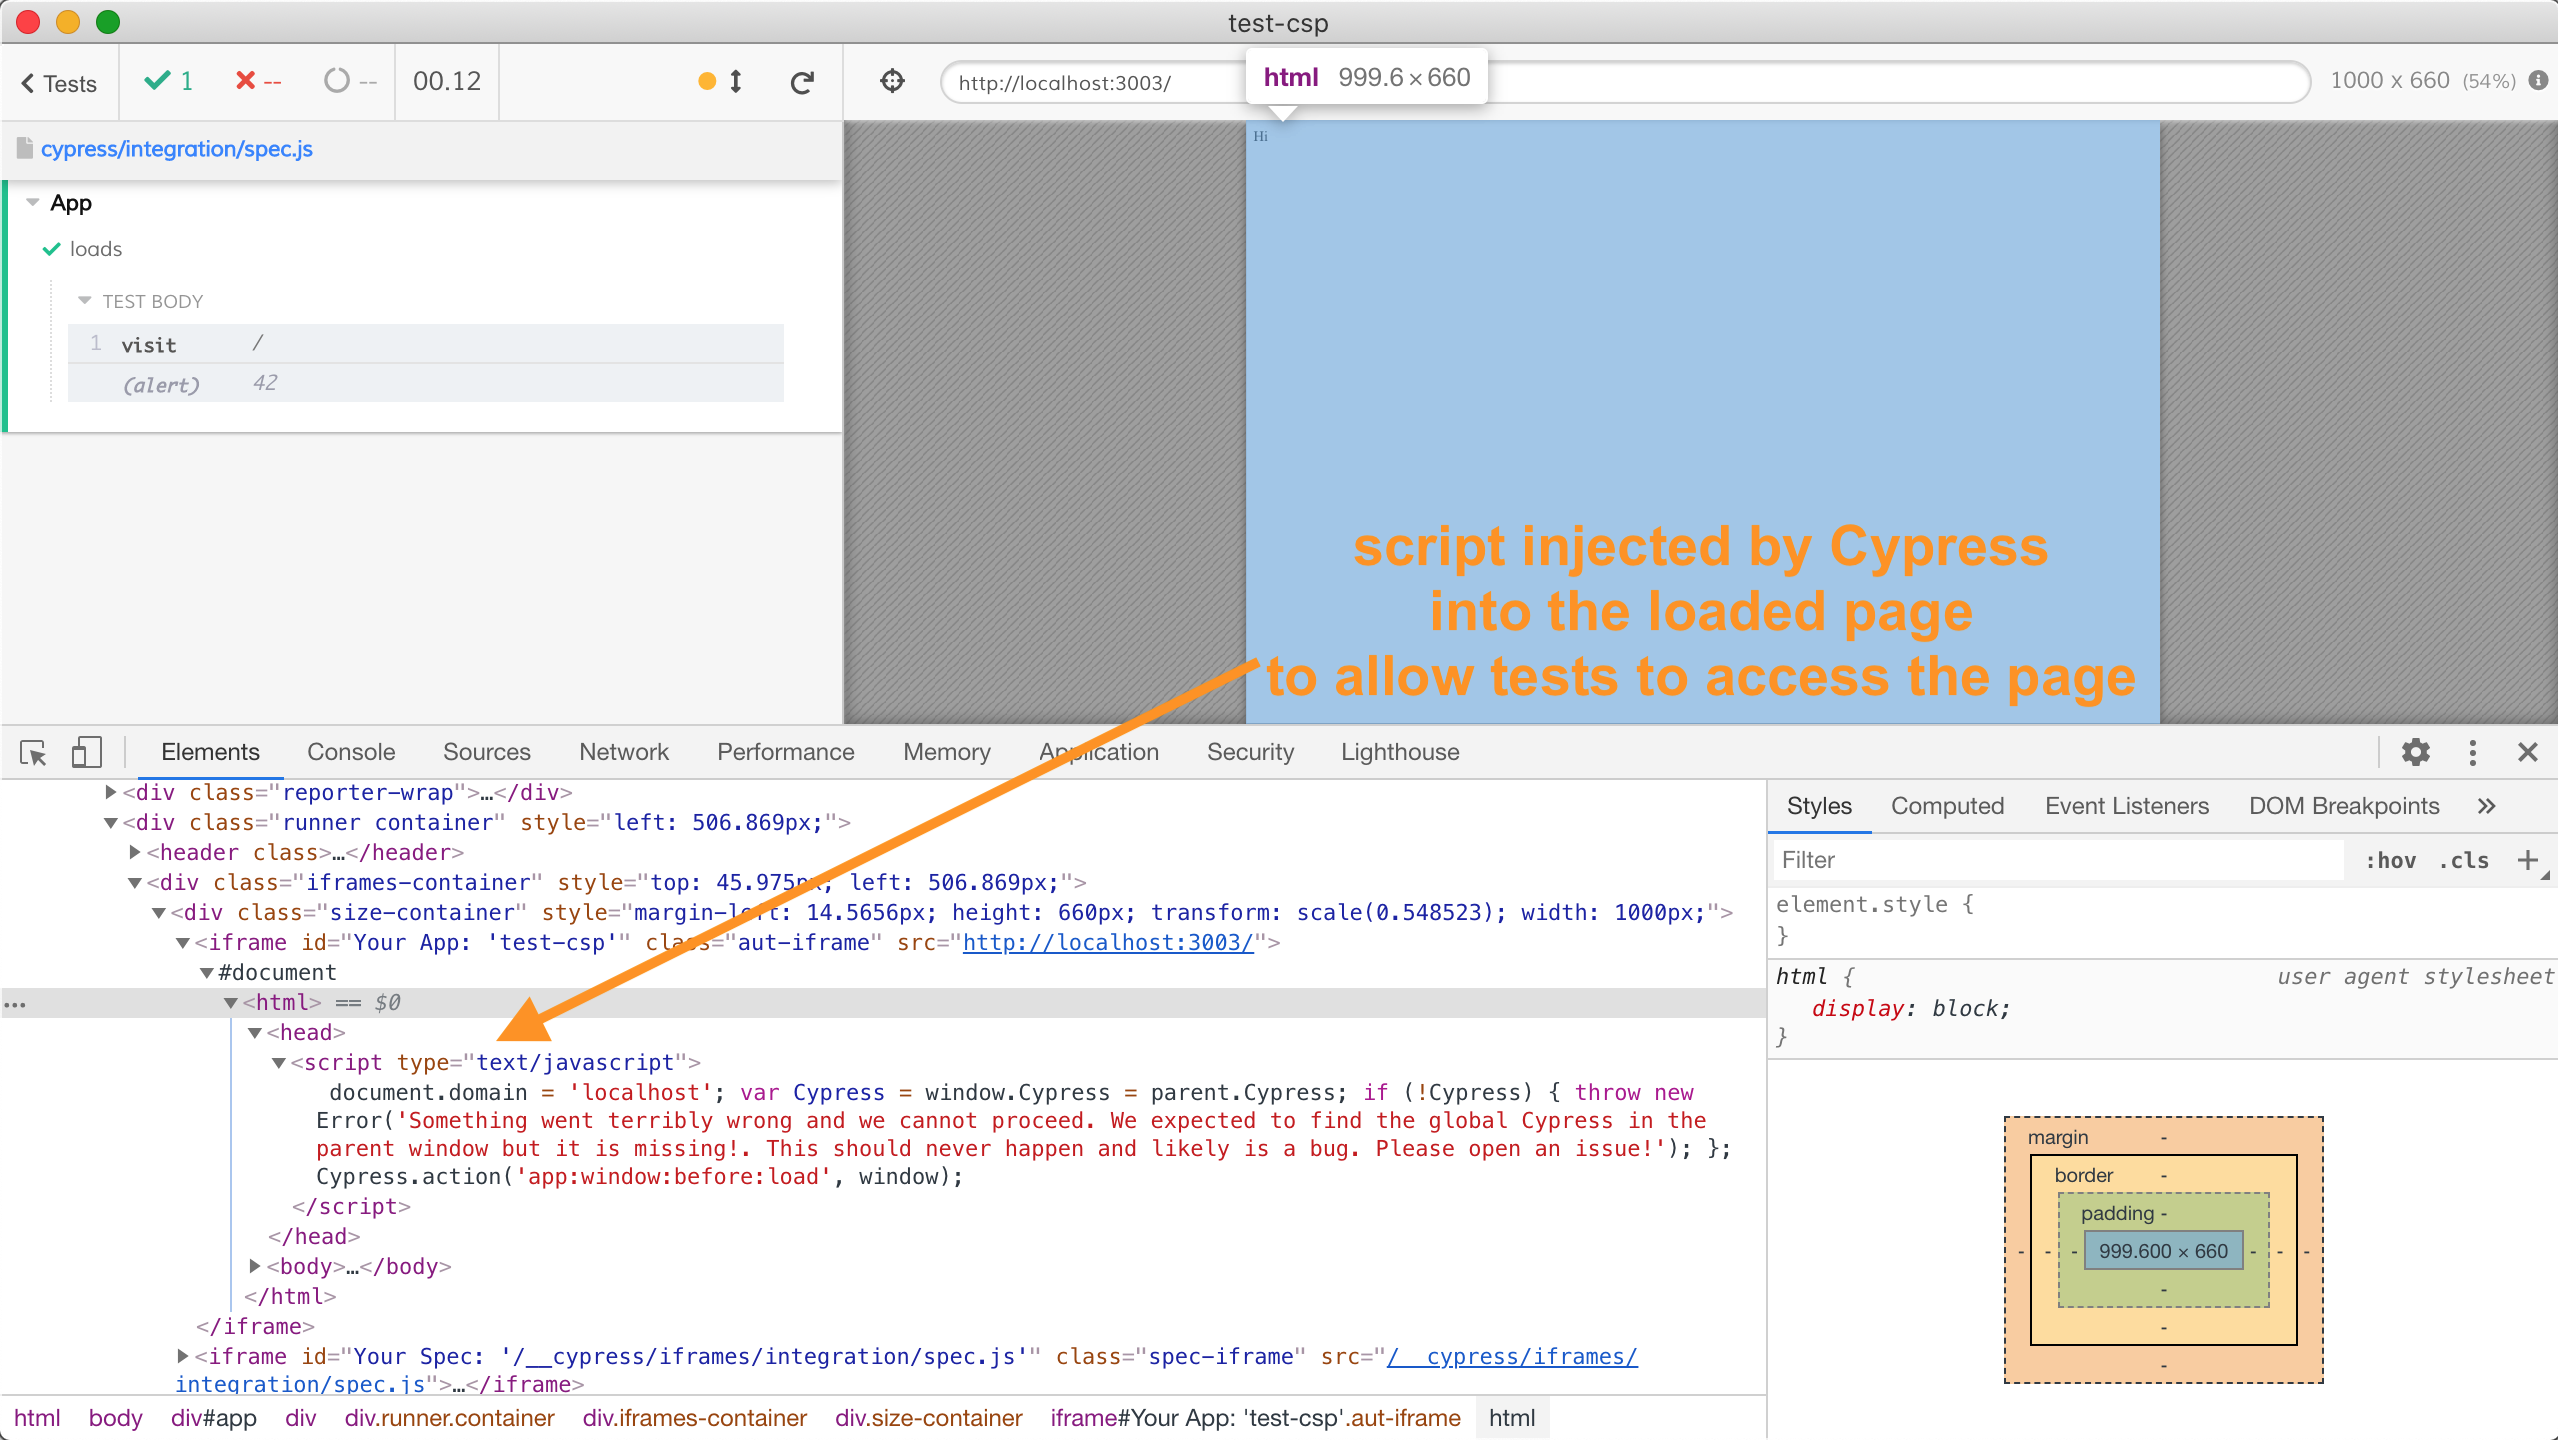 The script injected by Cypress proxy into the visited page